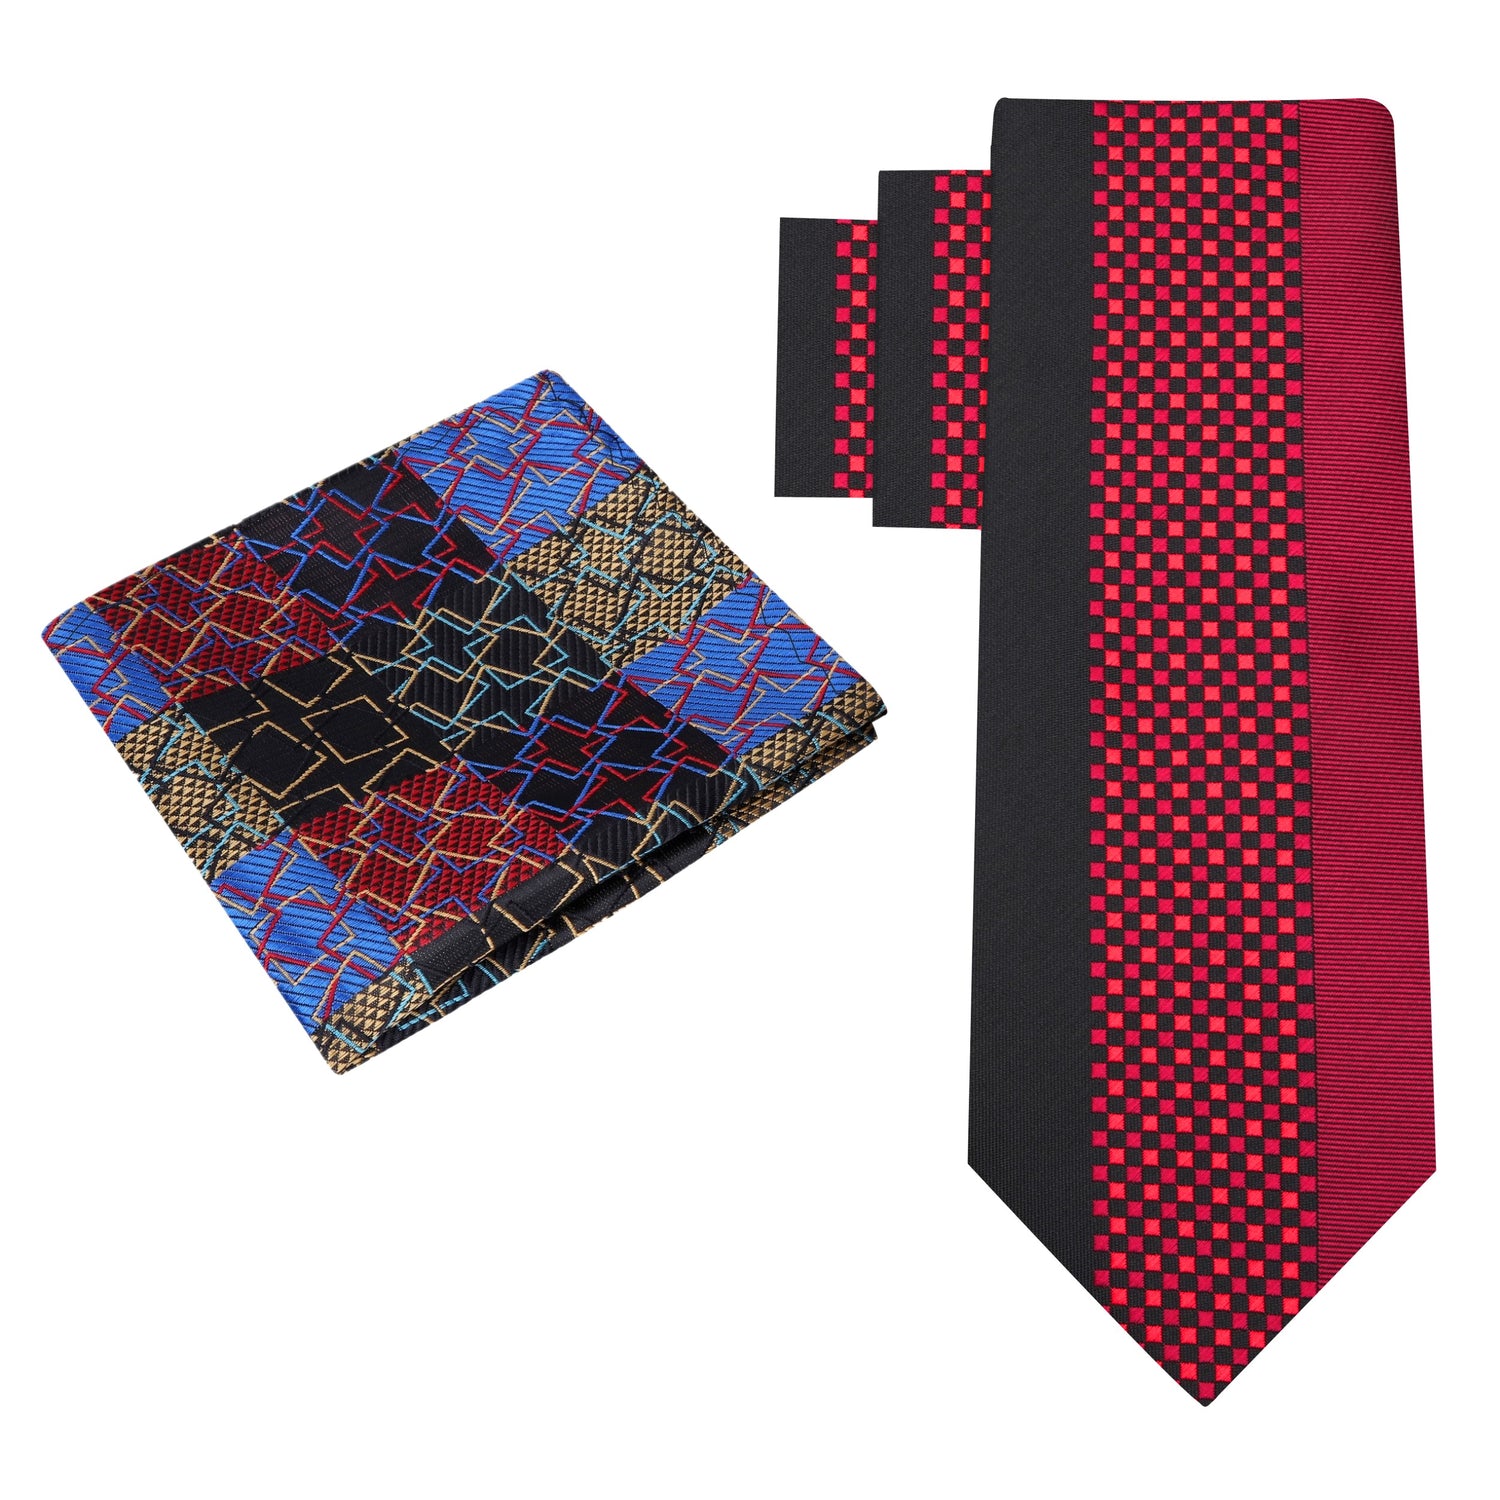 Alt View: Red & Black Check Necktie with Accenting Black, Blue. Gold  Abstract Square